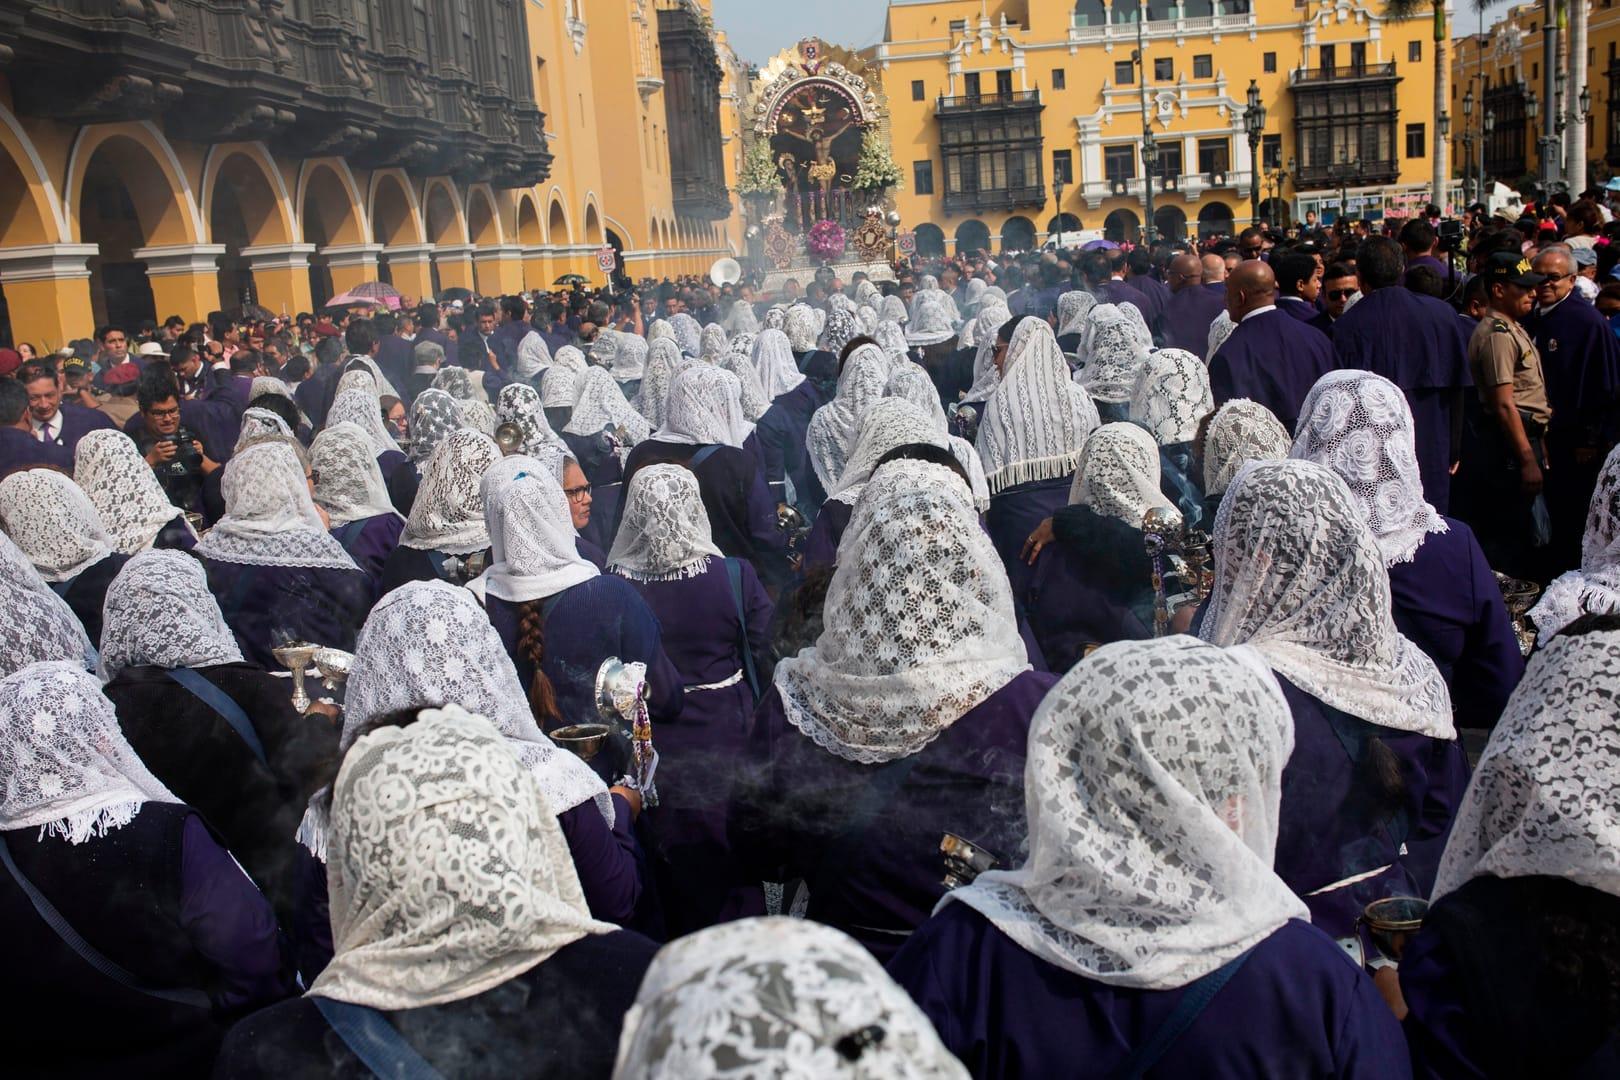 Peru’s ‘Lord of Miracles’ procession canceled amid pandemic